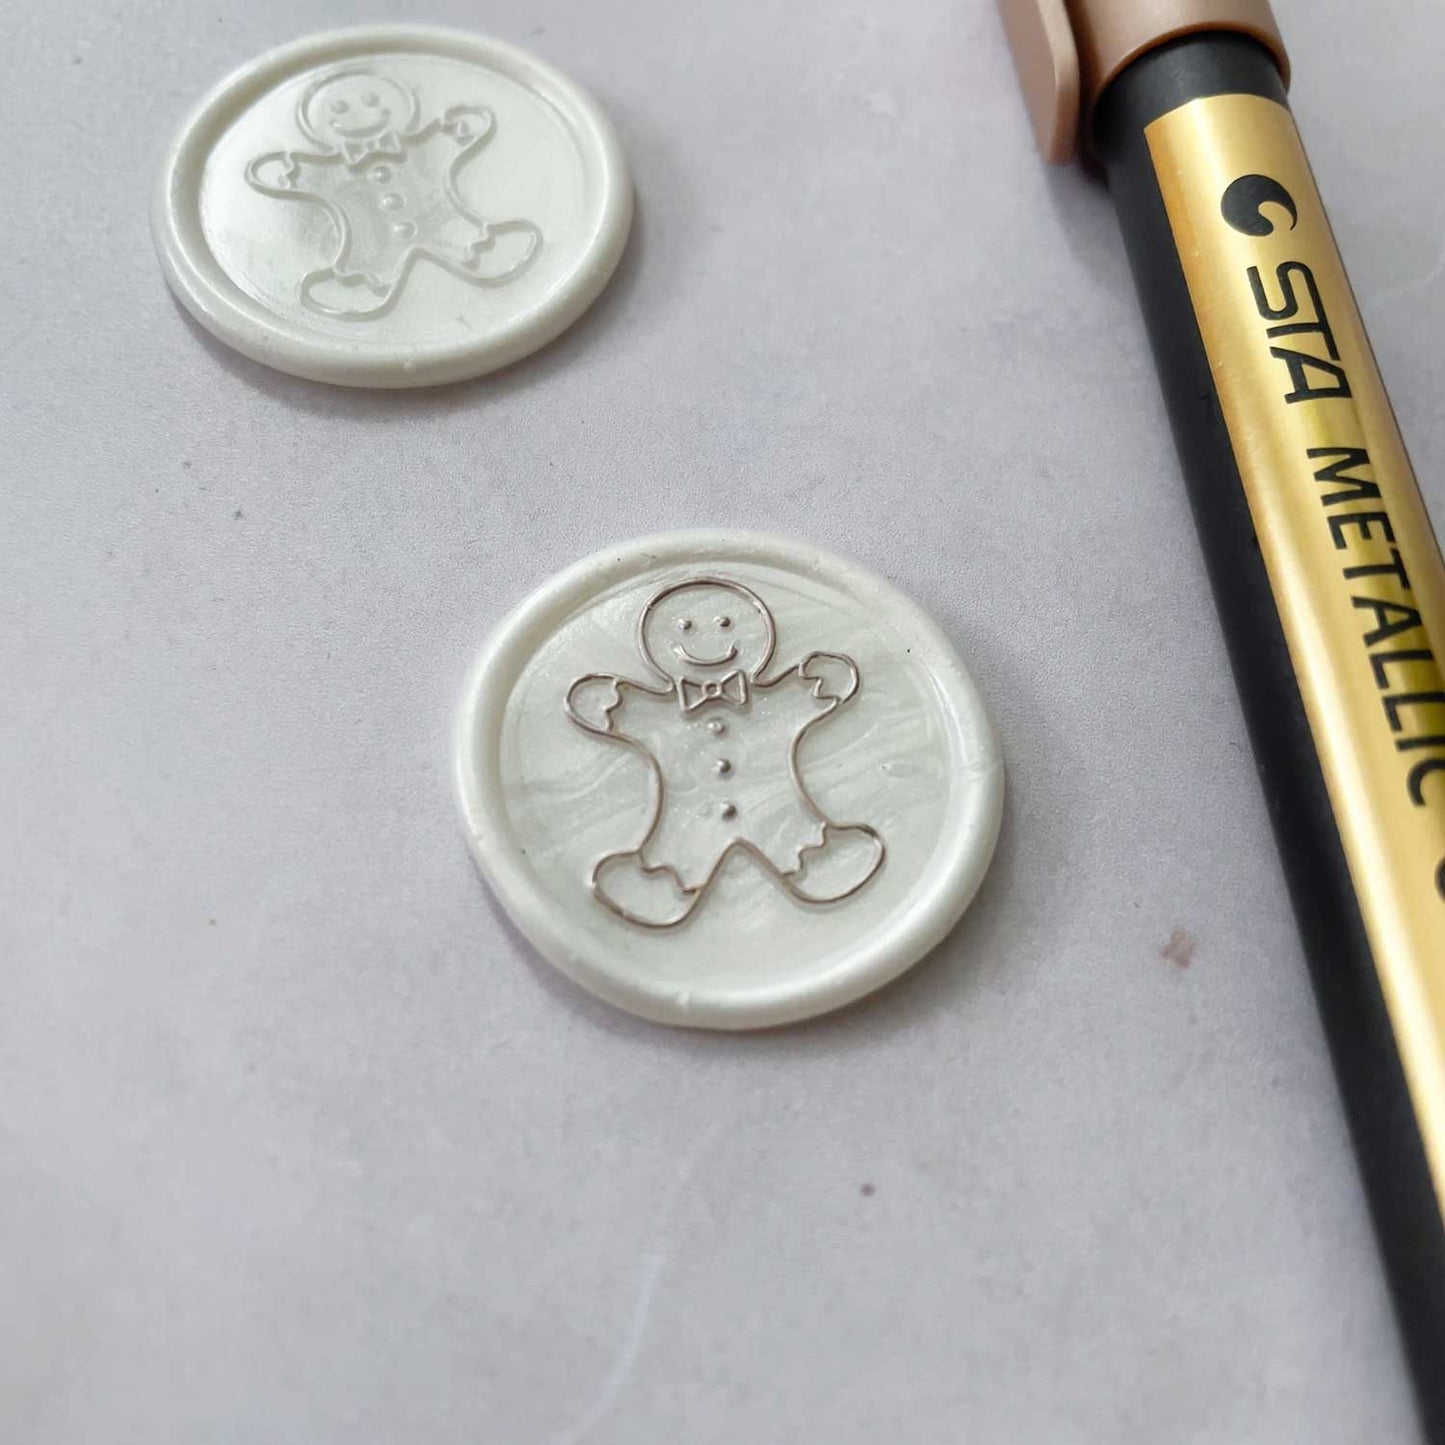 Champagne Gold Wax Seal Highlighter Pen By The Natural Paper Company.  Add metallic details to your sealing wax stamps.  